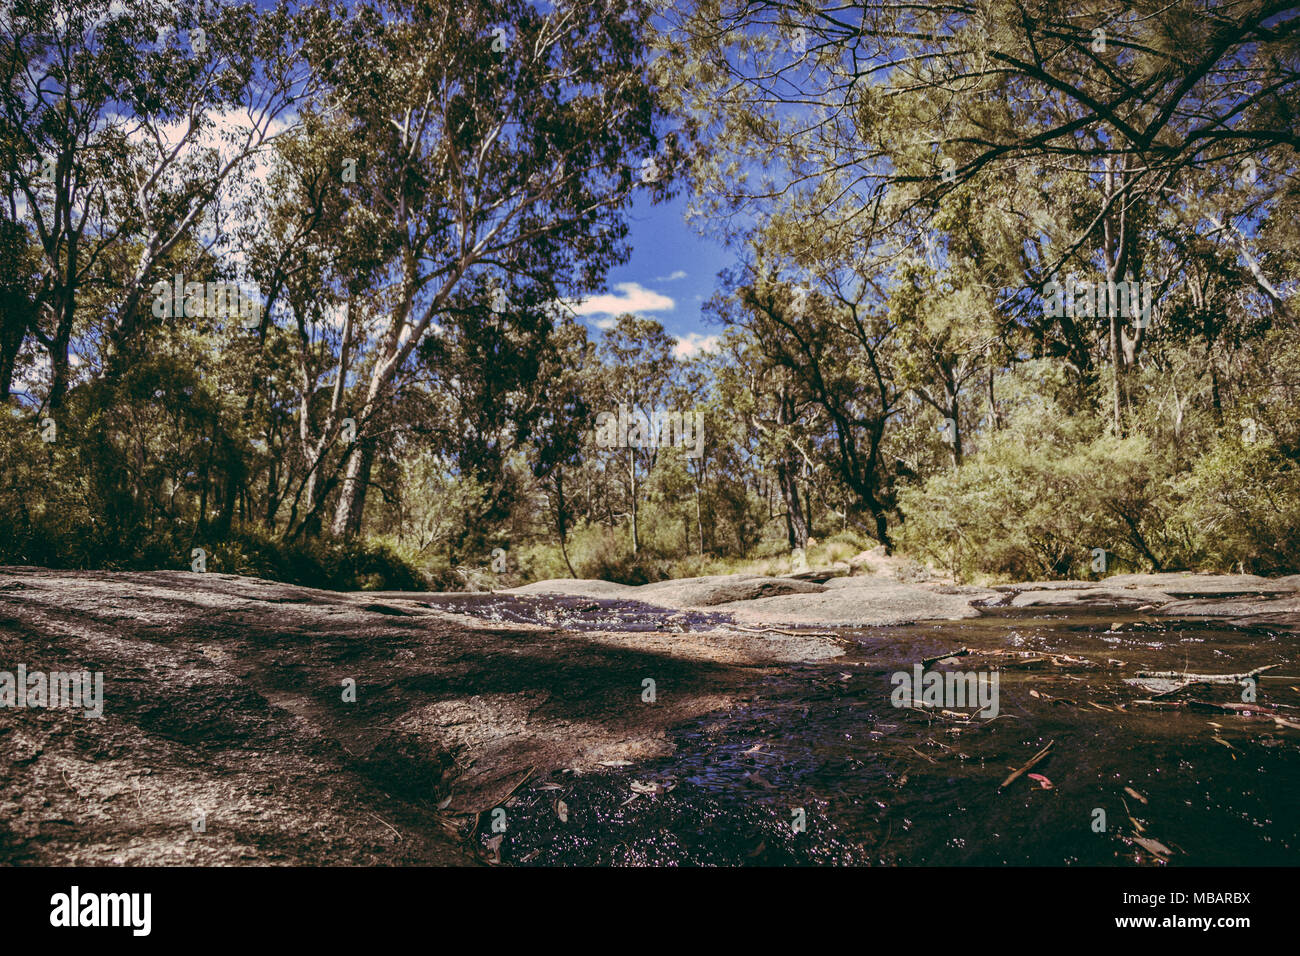 Megalong Valley Creek Bed, Blue Mountains, Australia Stock Photo